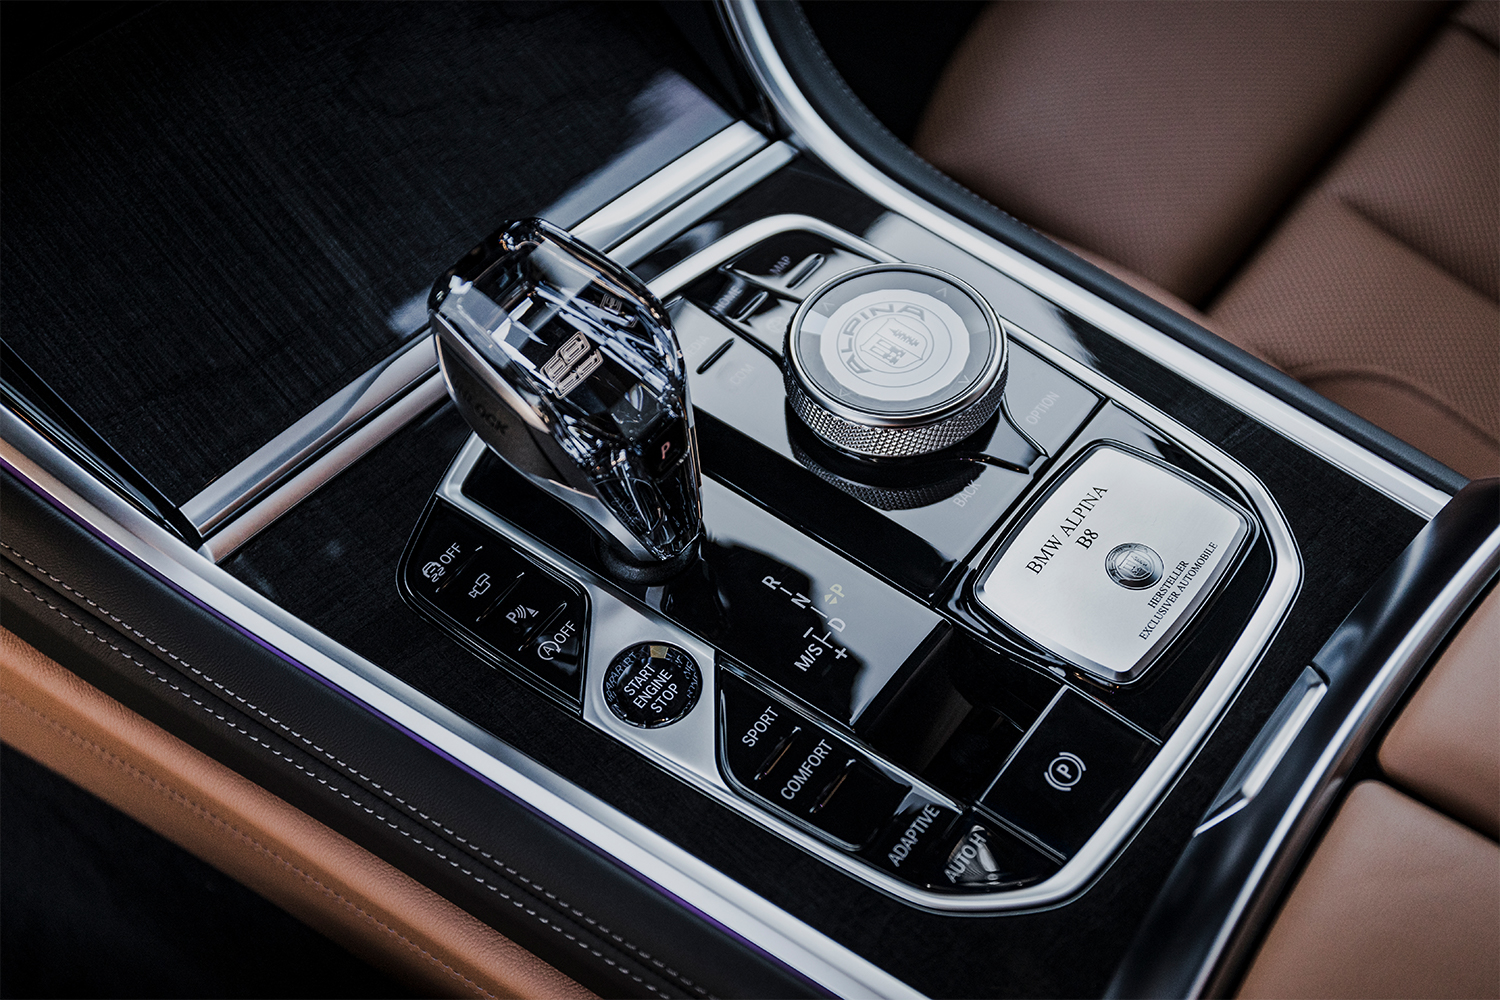 The gear selector in the 2022 BMW Alpina B8 Gran Coupe, which we recently tested and reviewed.